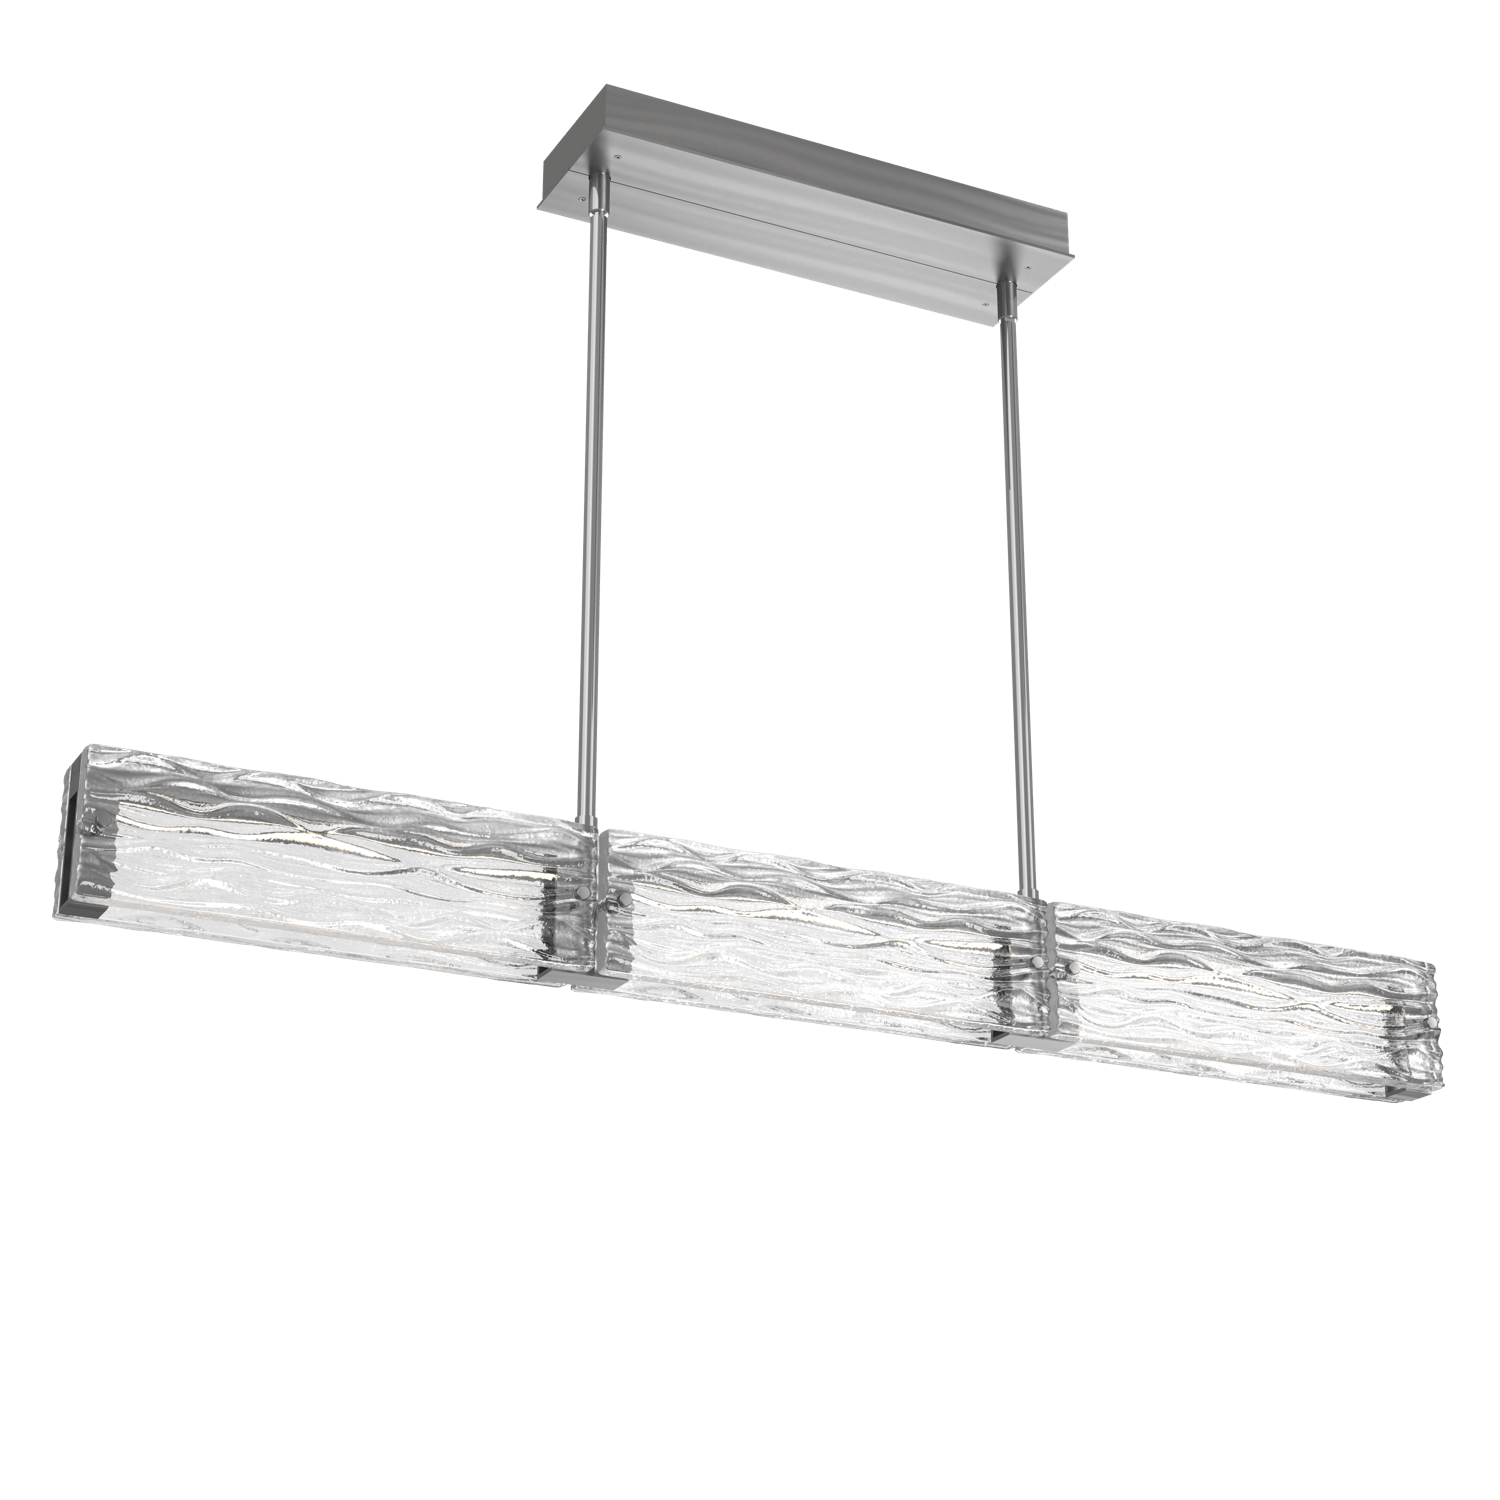 PLB0090-43-SN-TT-Hammerton-Studio-Tabulo-43-inch-linear-chandelier-with-satin-nickel-finish-and-clear-tidal-cast-glass-shade-and-LED-lamping